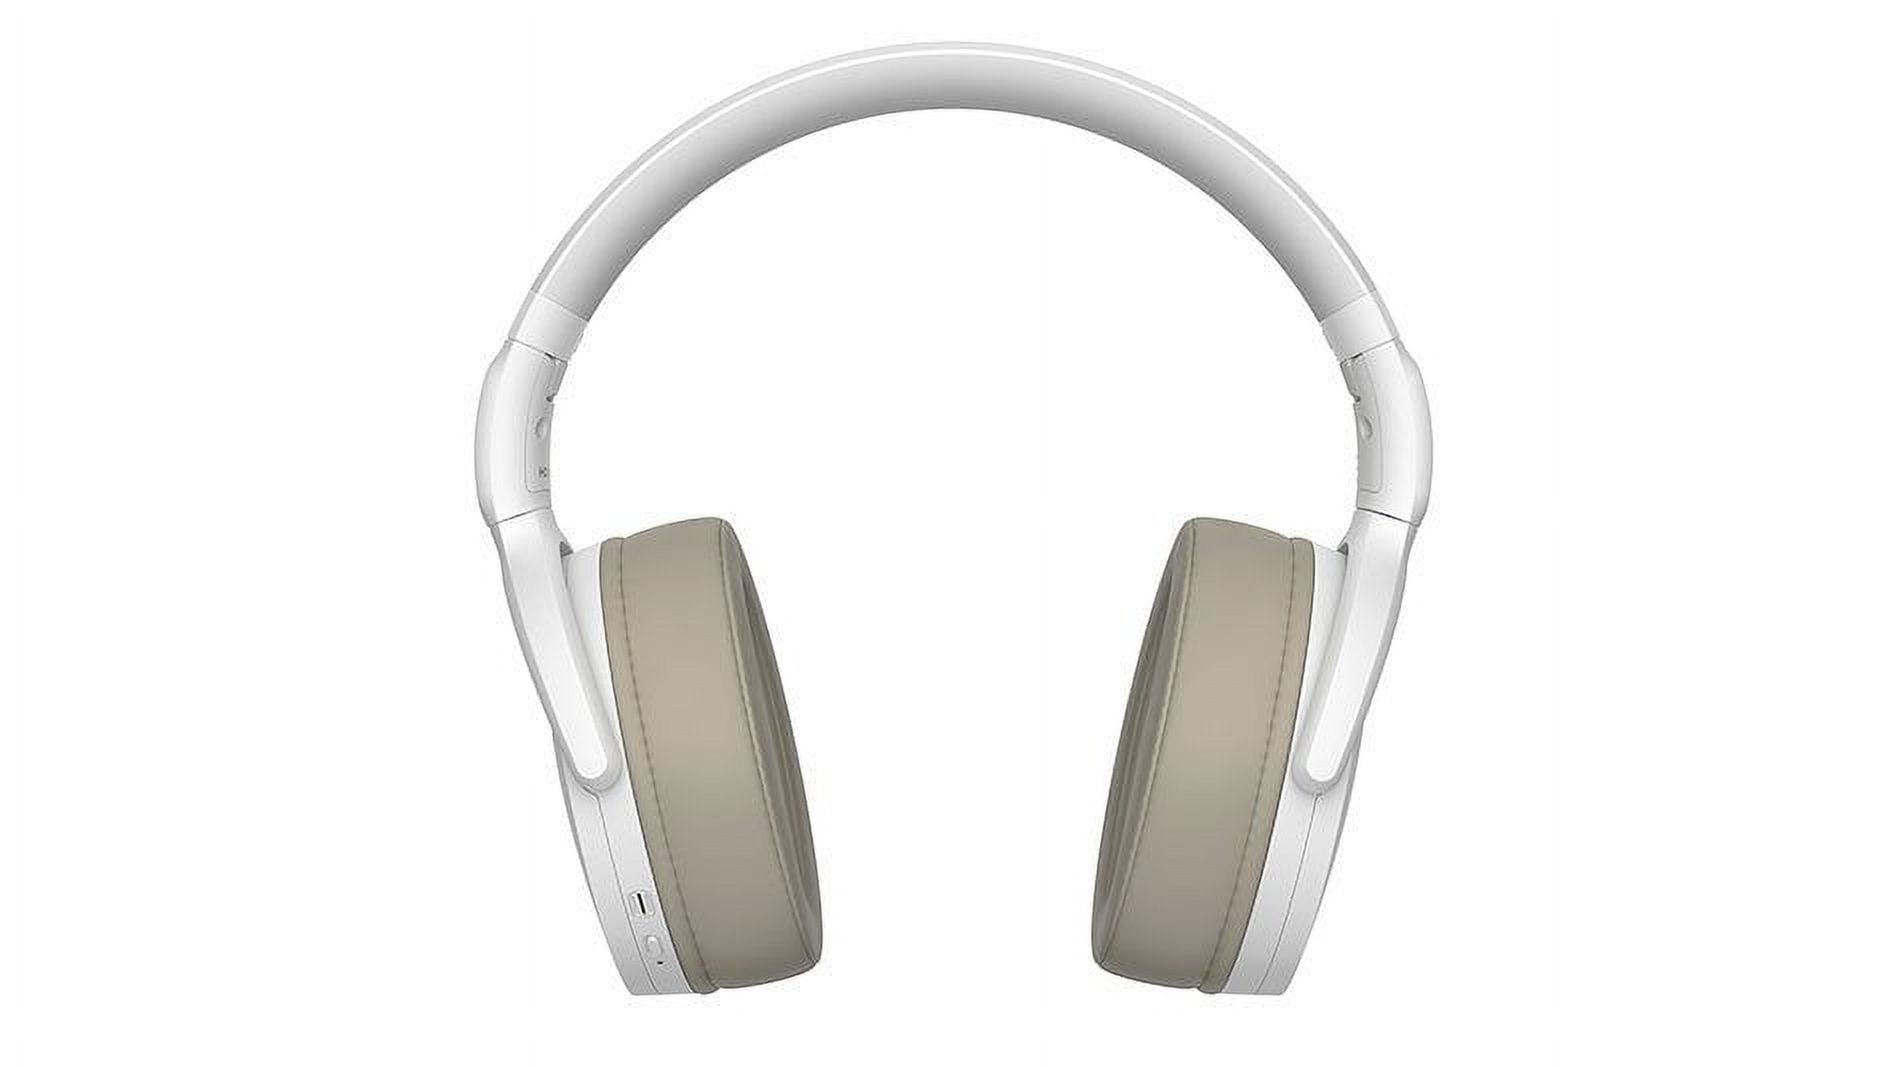 Sennheiser HD 350BT Bluetooth 5.0 Wireless Headphone - 30-Hour Battery Life, USB-C Fast Charging, Virtual Assistant Button, Foldable - White - image 2 of 6